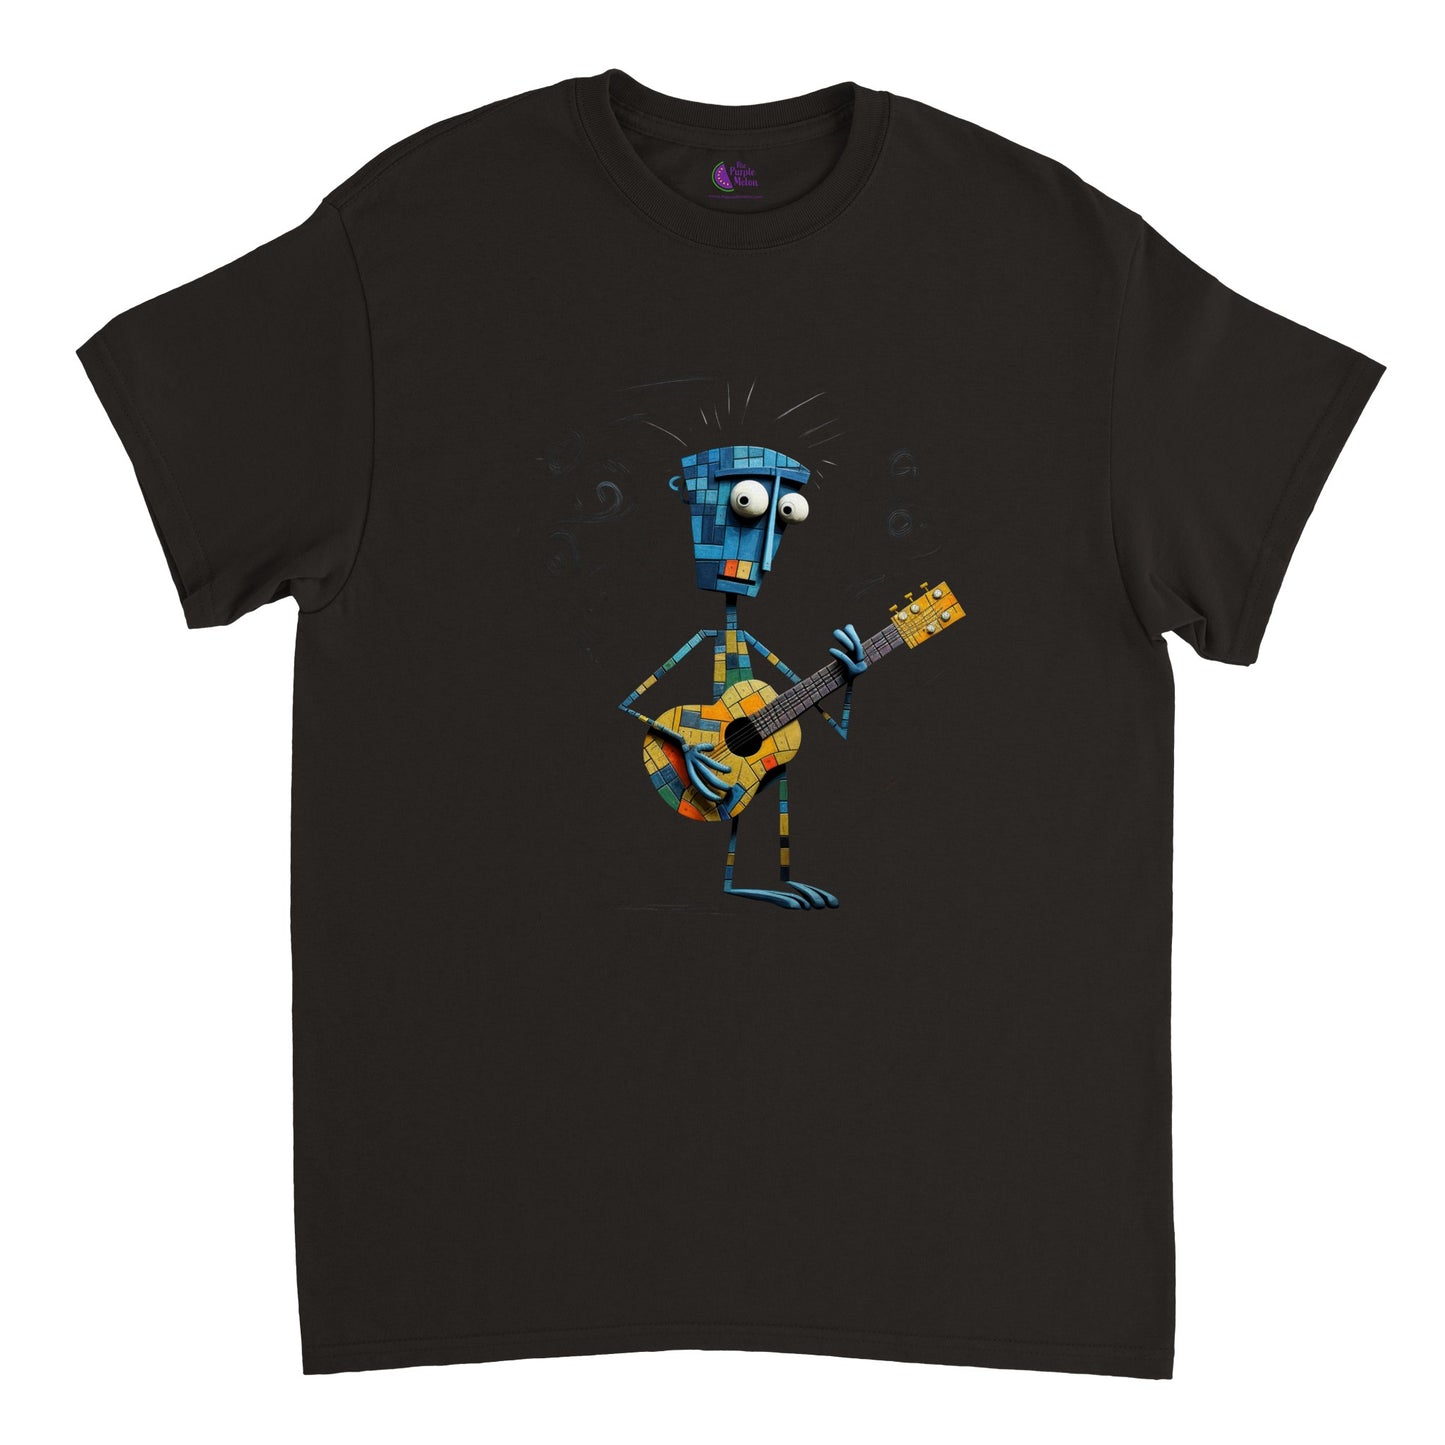 black t-shirt with an abstract character playing guitar print